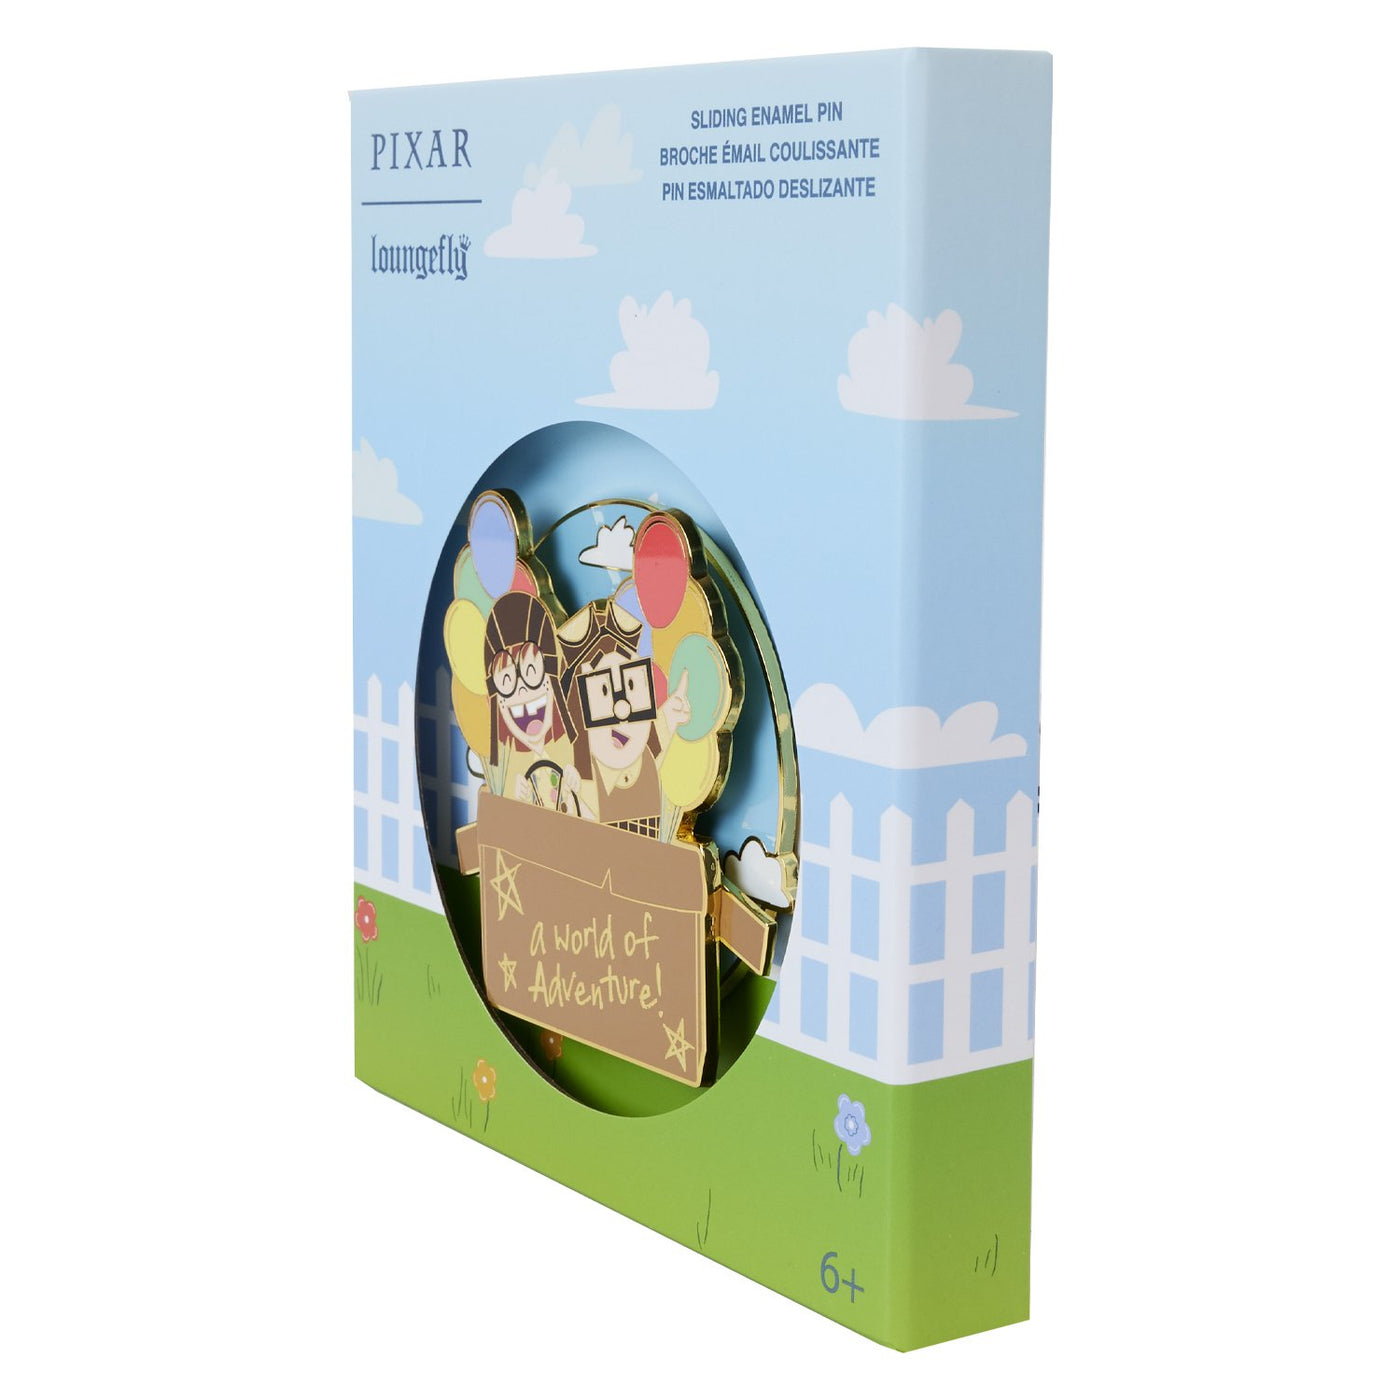 Loungefly Pixar Up 15th Anniversary Spirit of Adventure Moving 3" Collector Box Pin - Side View